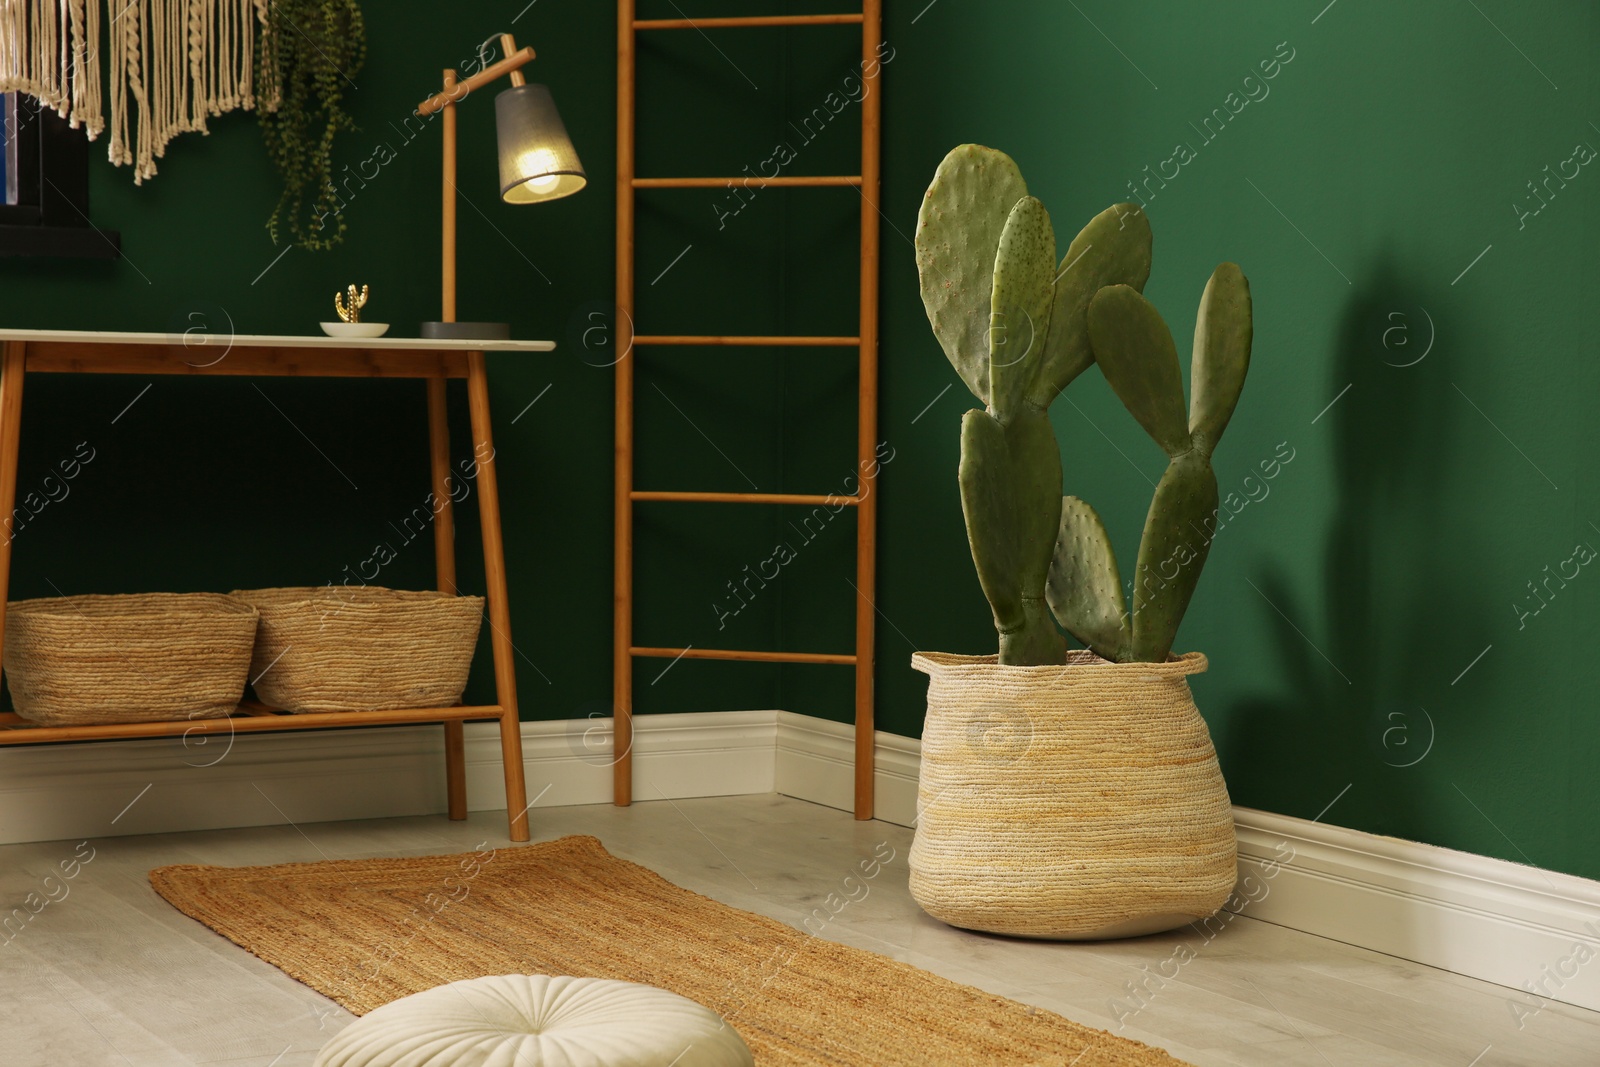 Photo of Potted cactus near green wall in room